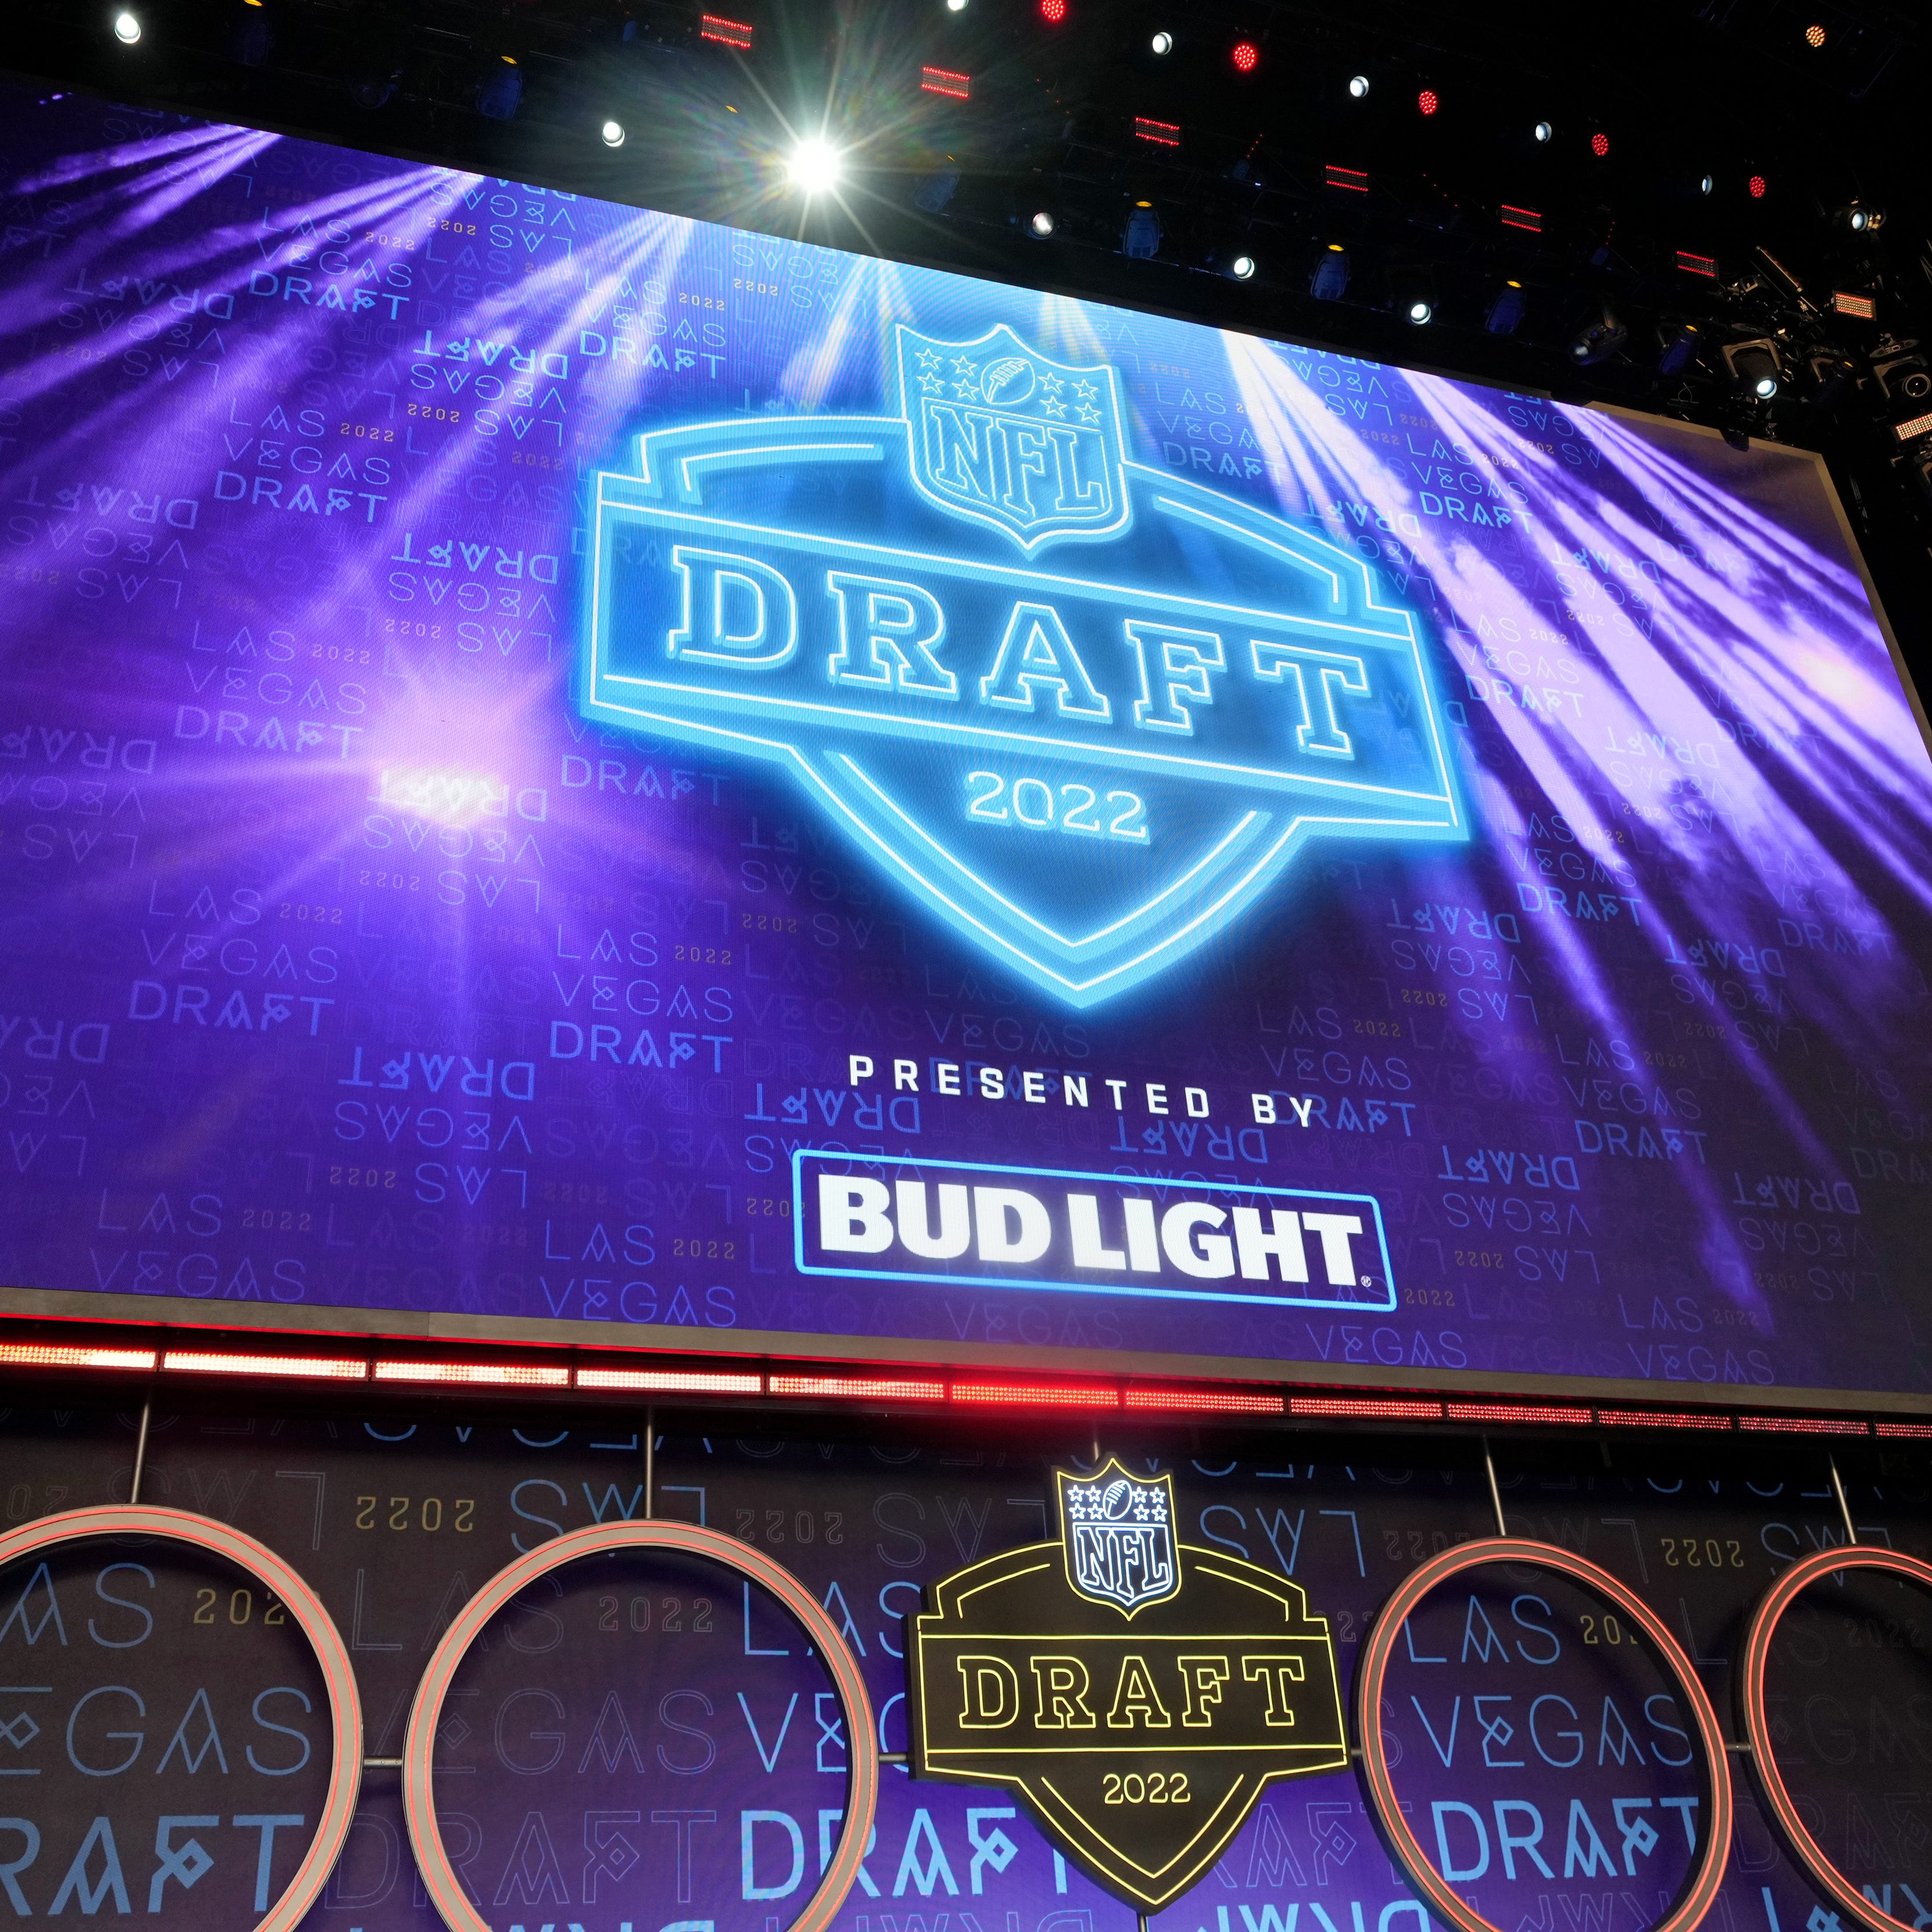 The 2022 NFL Draft logo is displayed during the first round of the 2022 NFL Draft at the NFL Draft Theater.